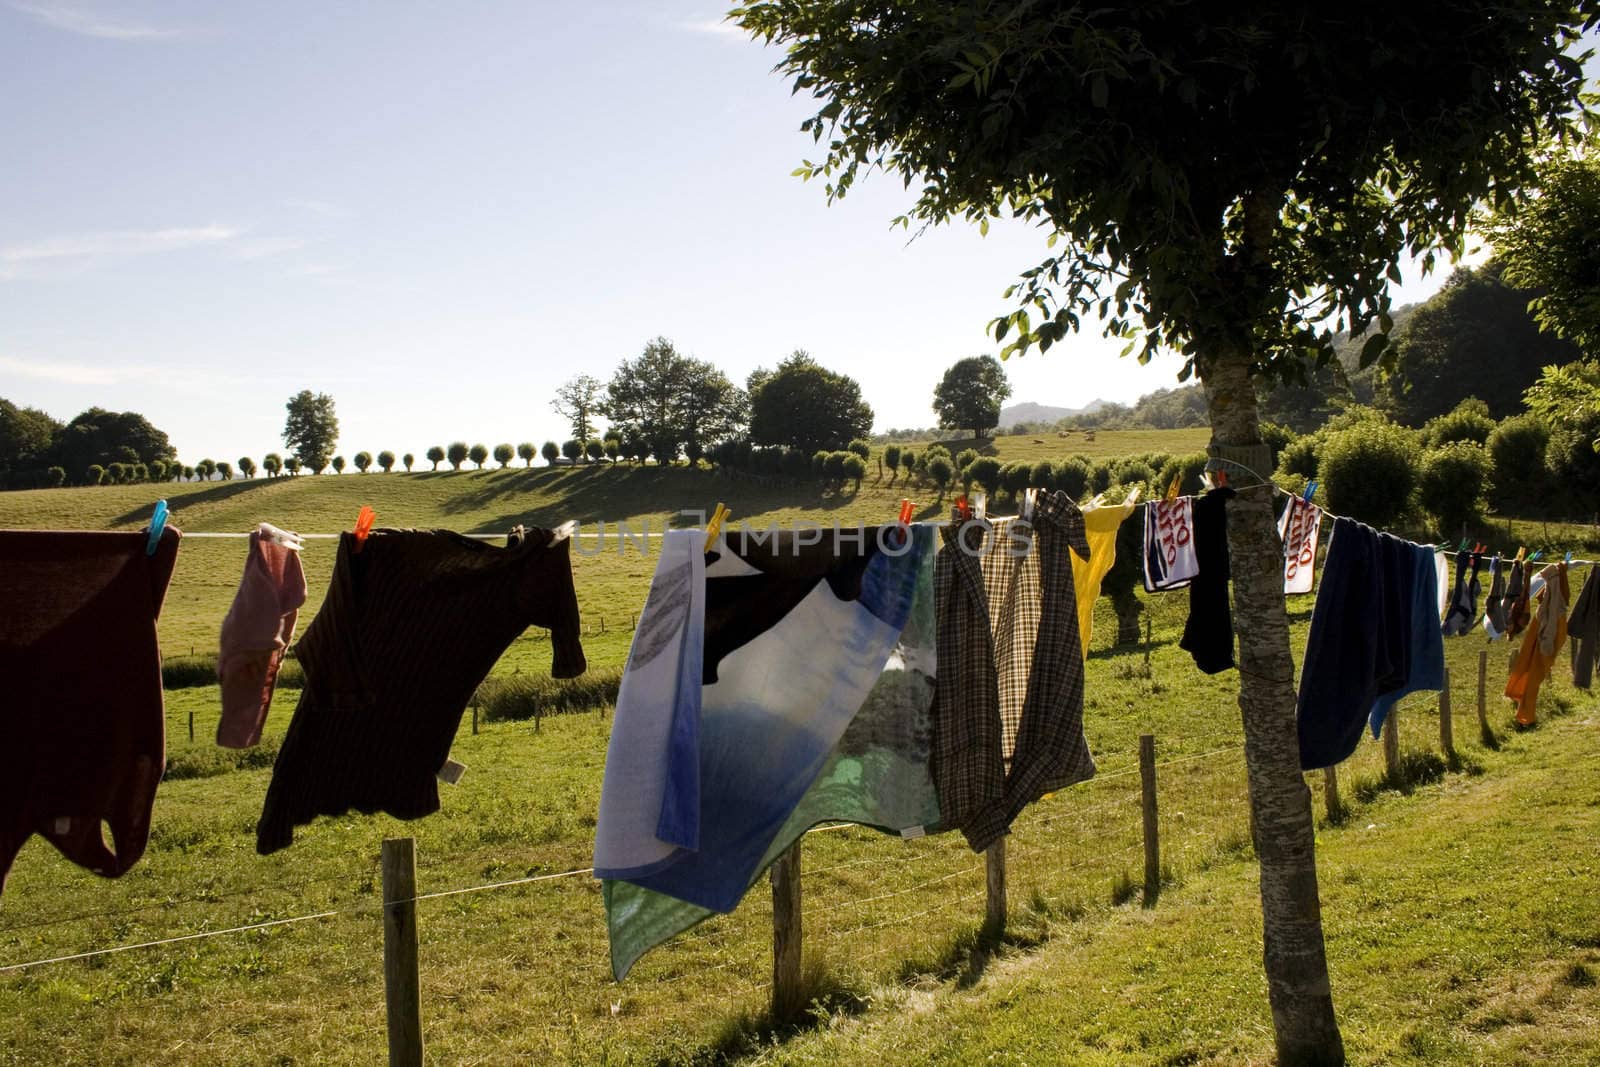 Laundry hanging to dry on a clothes-line